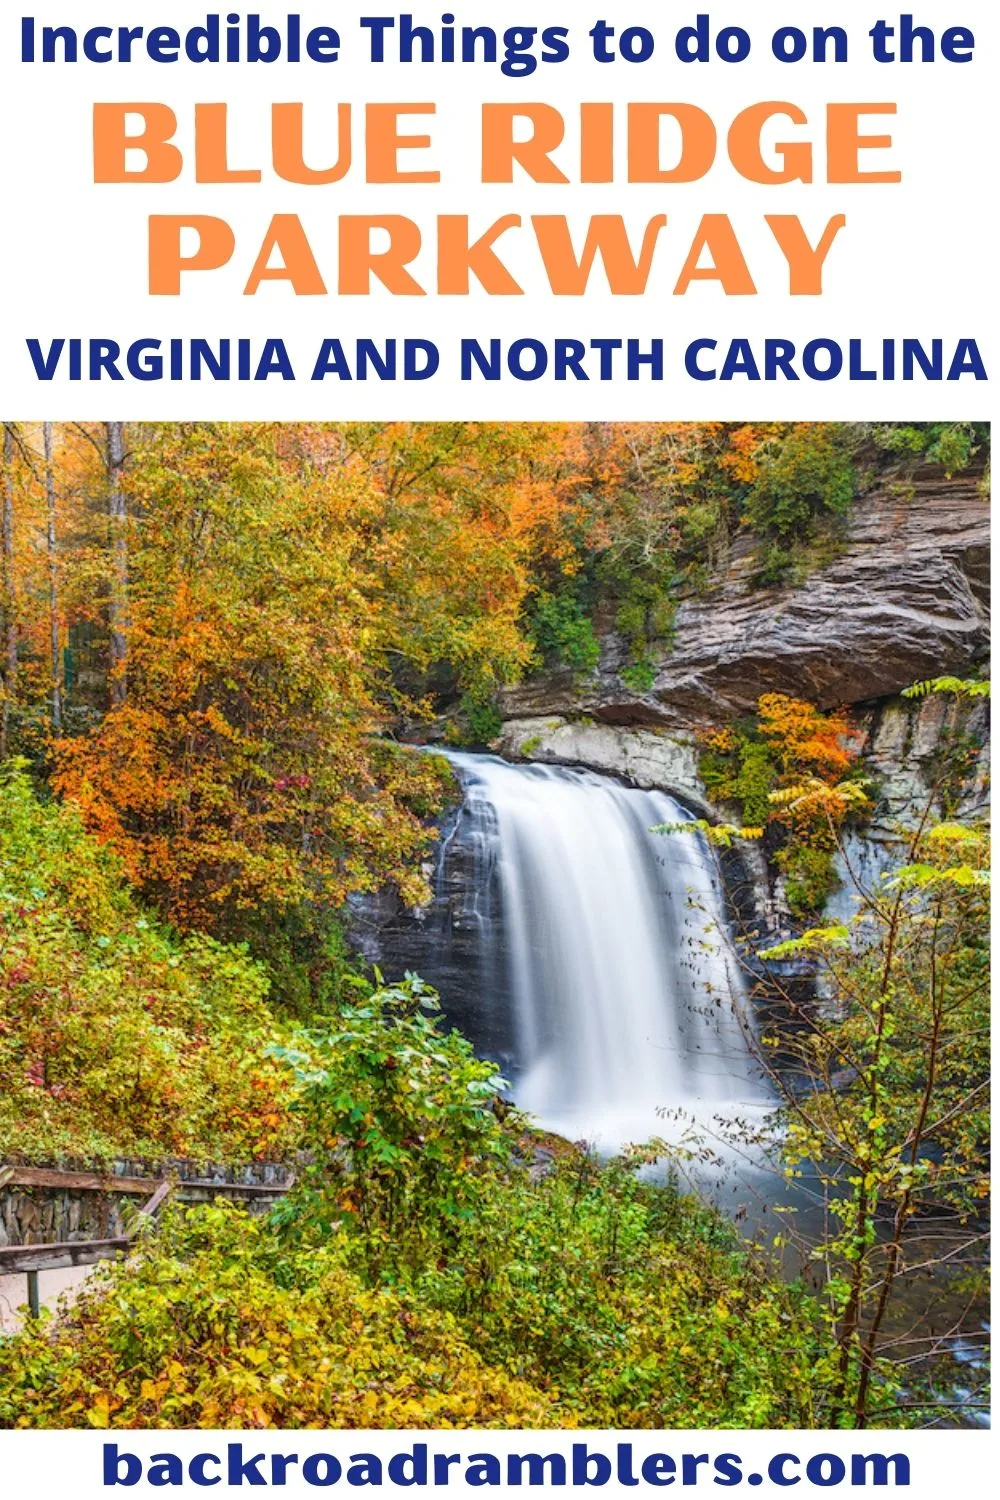 A view of Looking Glass Falls near the Blue Ridge Parkway in Pisgah National Forest, North Carolina. Text overlay: the best things to do on the Blue Ridge Parkway.